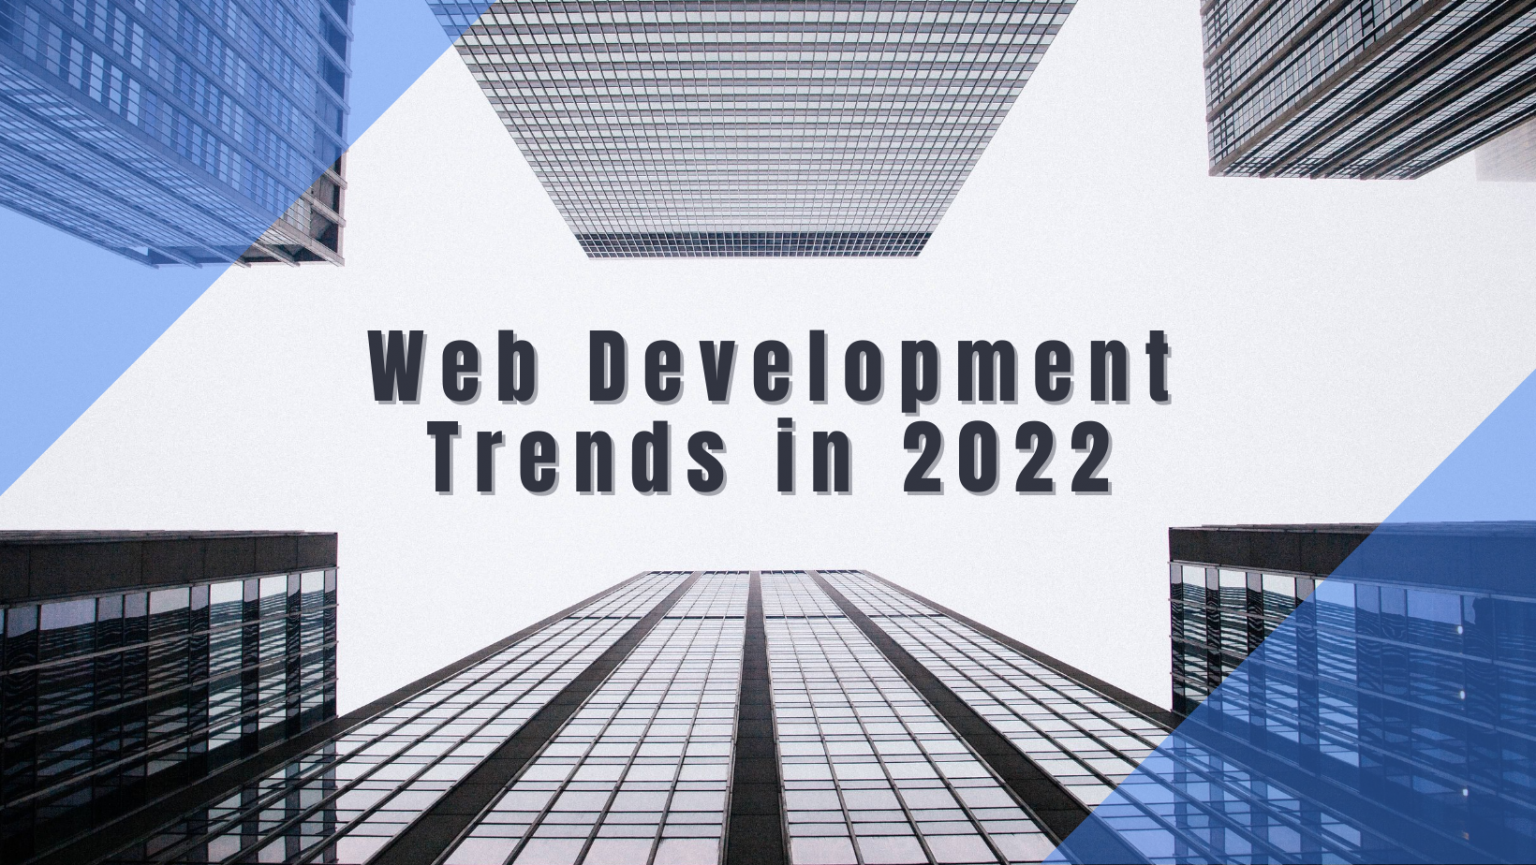 Leveraging Top Web Development Trends for Higher ROI